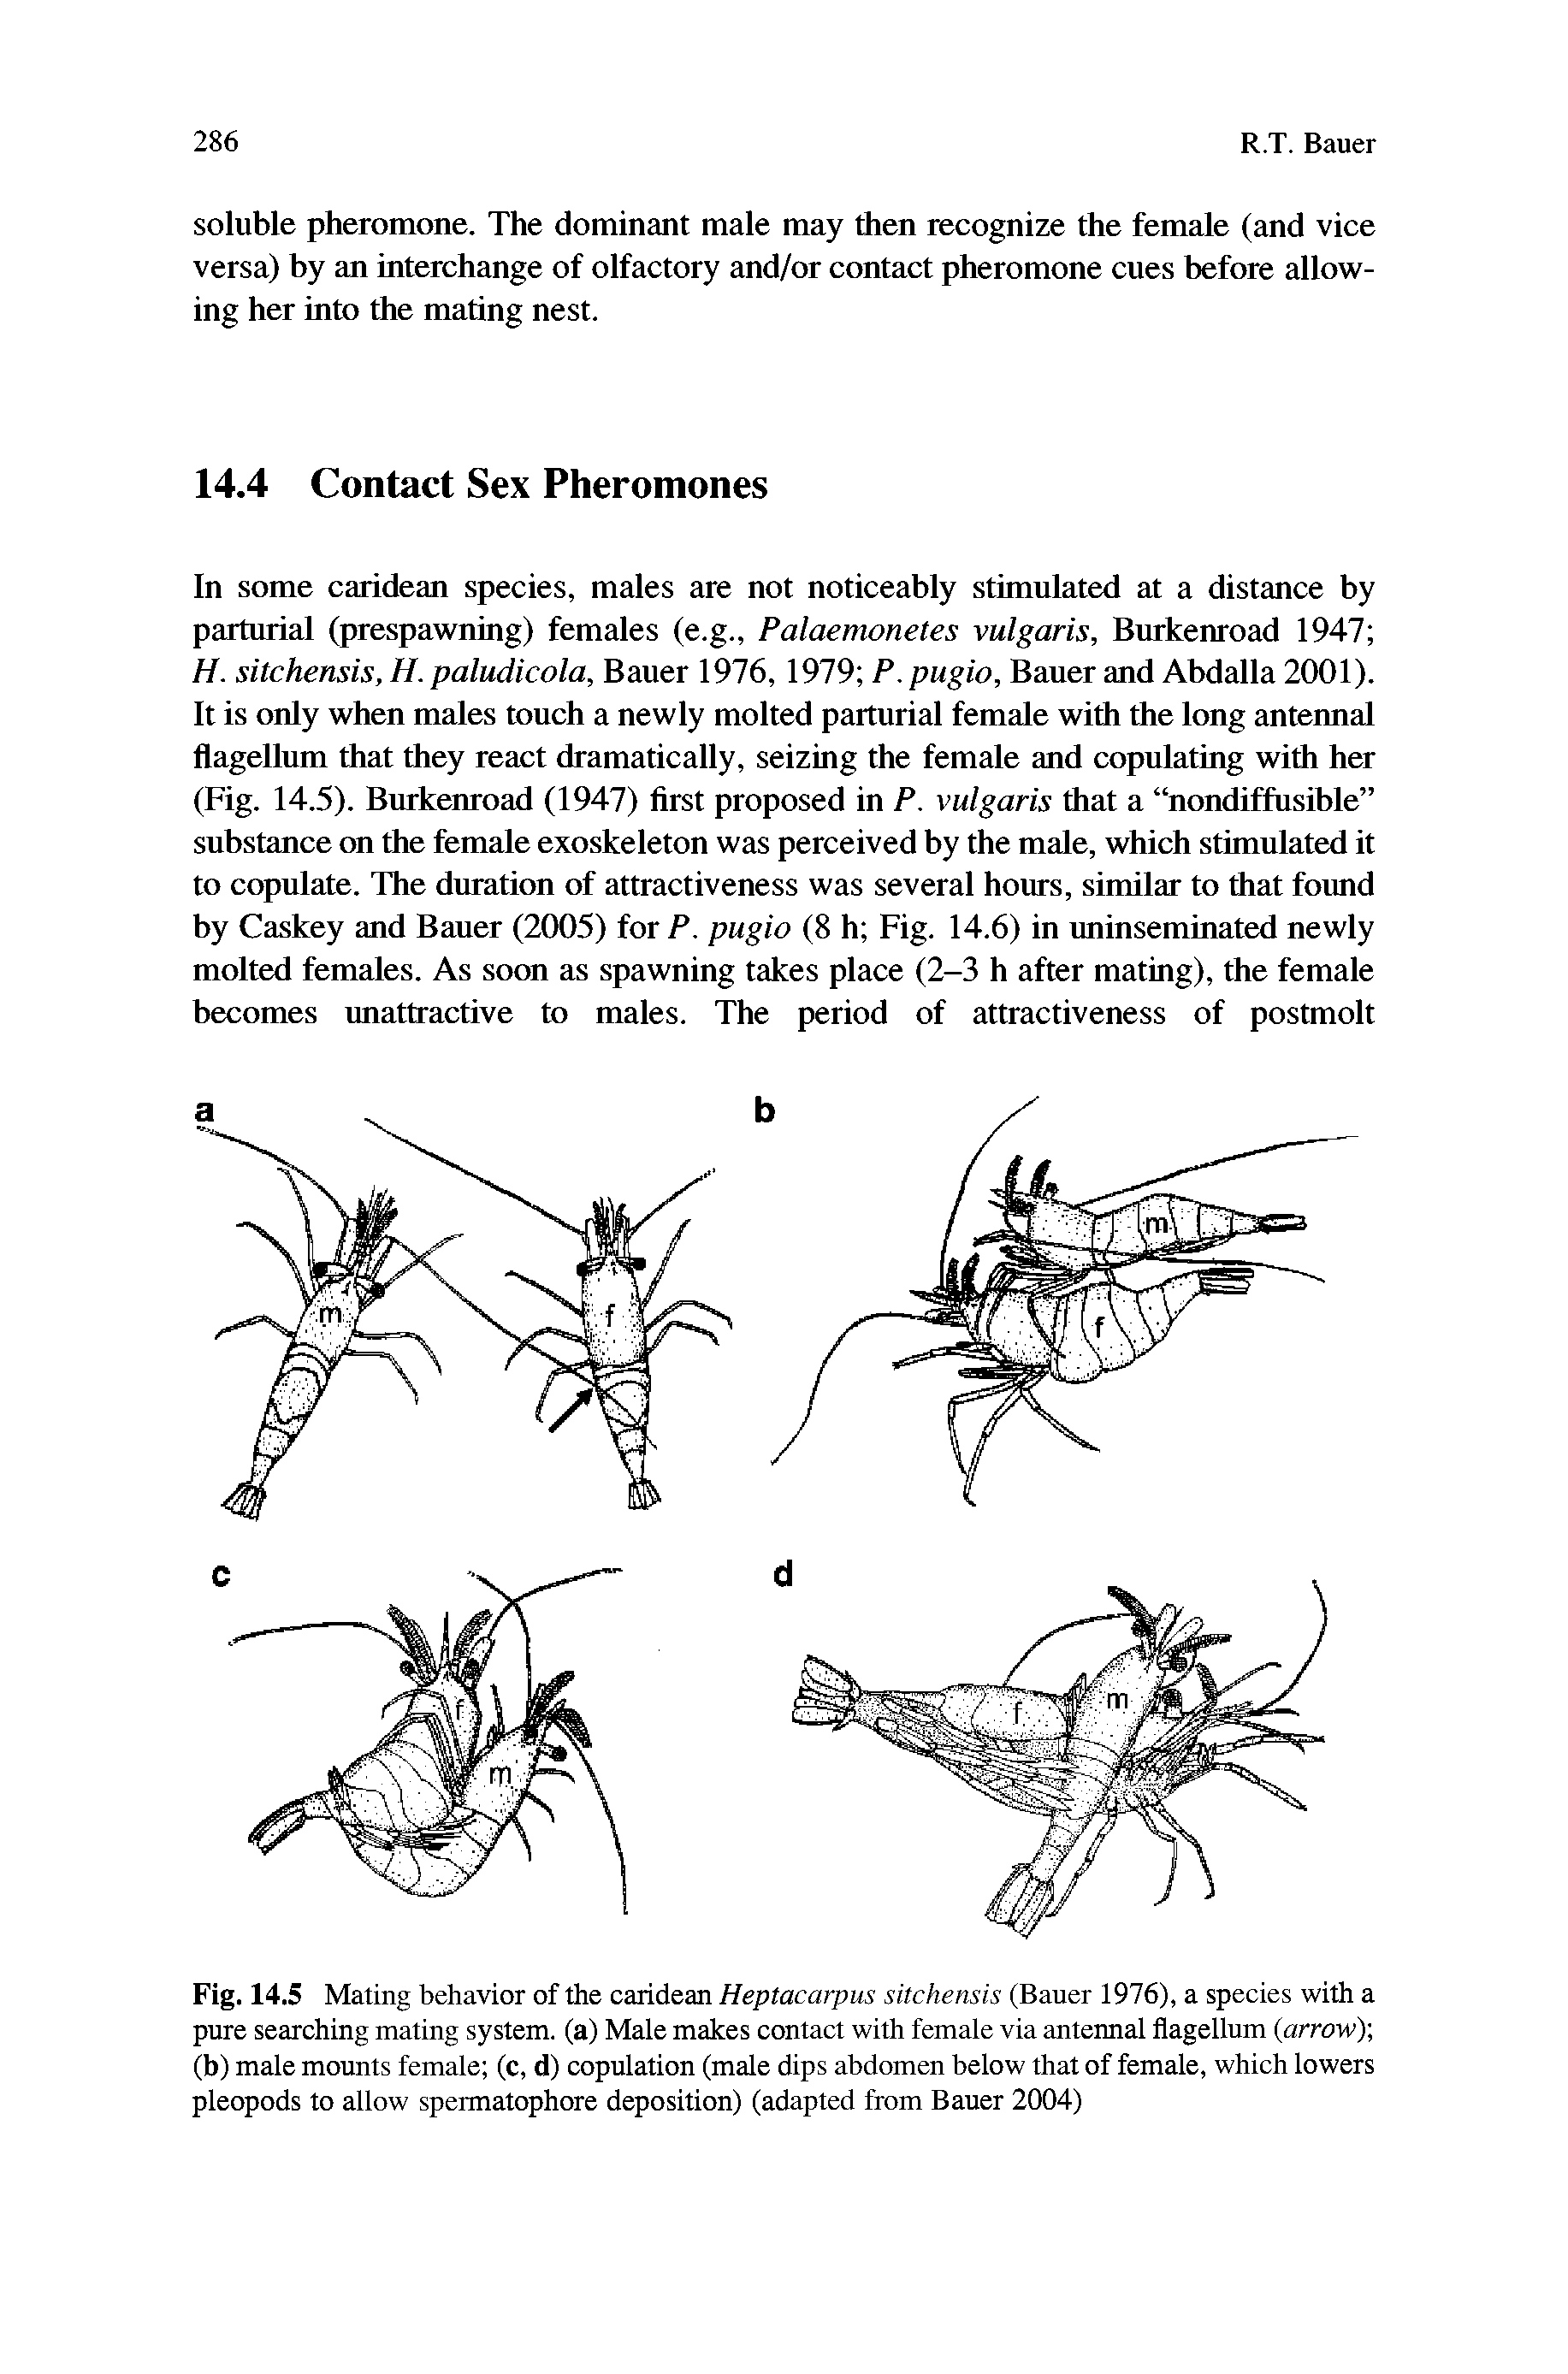 Fig. 14.5 Mating behavior of the caridean Heptacarpus sitchensis (Bauer 1976), a species with a pure searching mating system, (a) Male makes contact with female via antennal flagellum (arrow) (b) male mounts female (c, d) copulation (male dips abdomen below that of female, which lowers pleopods to allow spermatophore deposition) (adapted from Bauer 2004)...